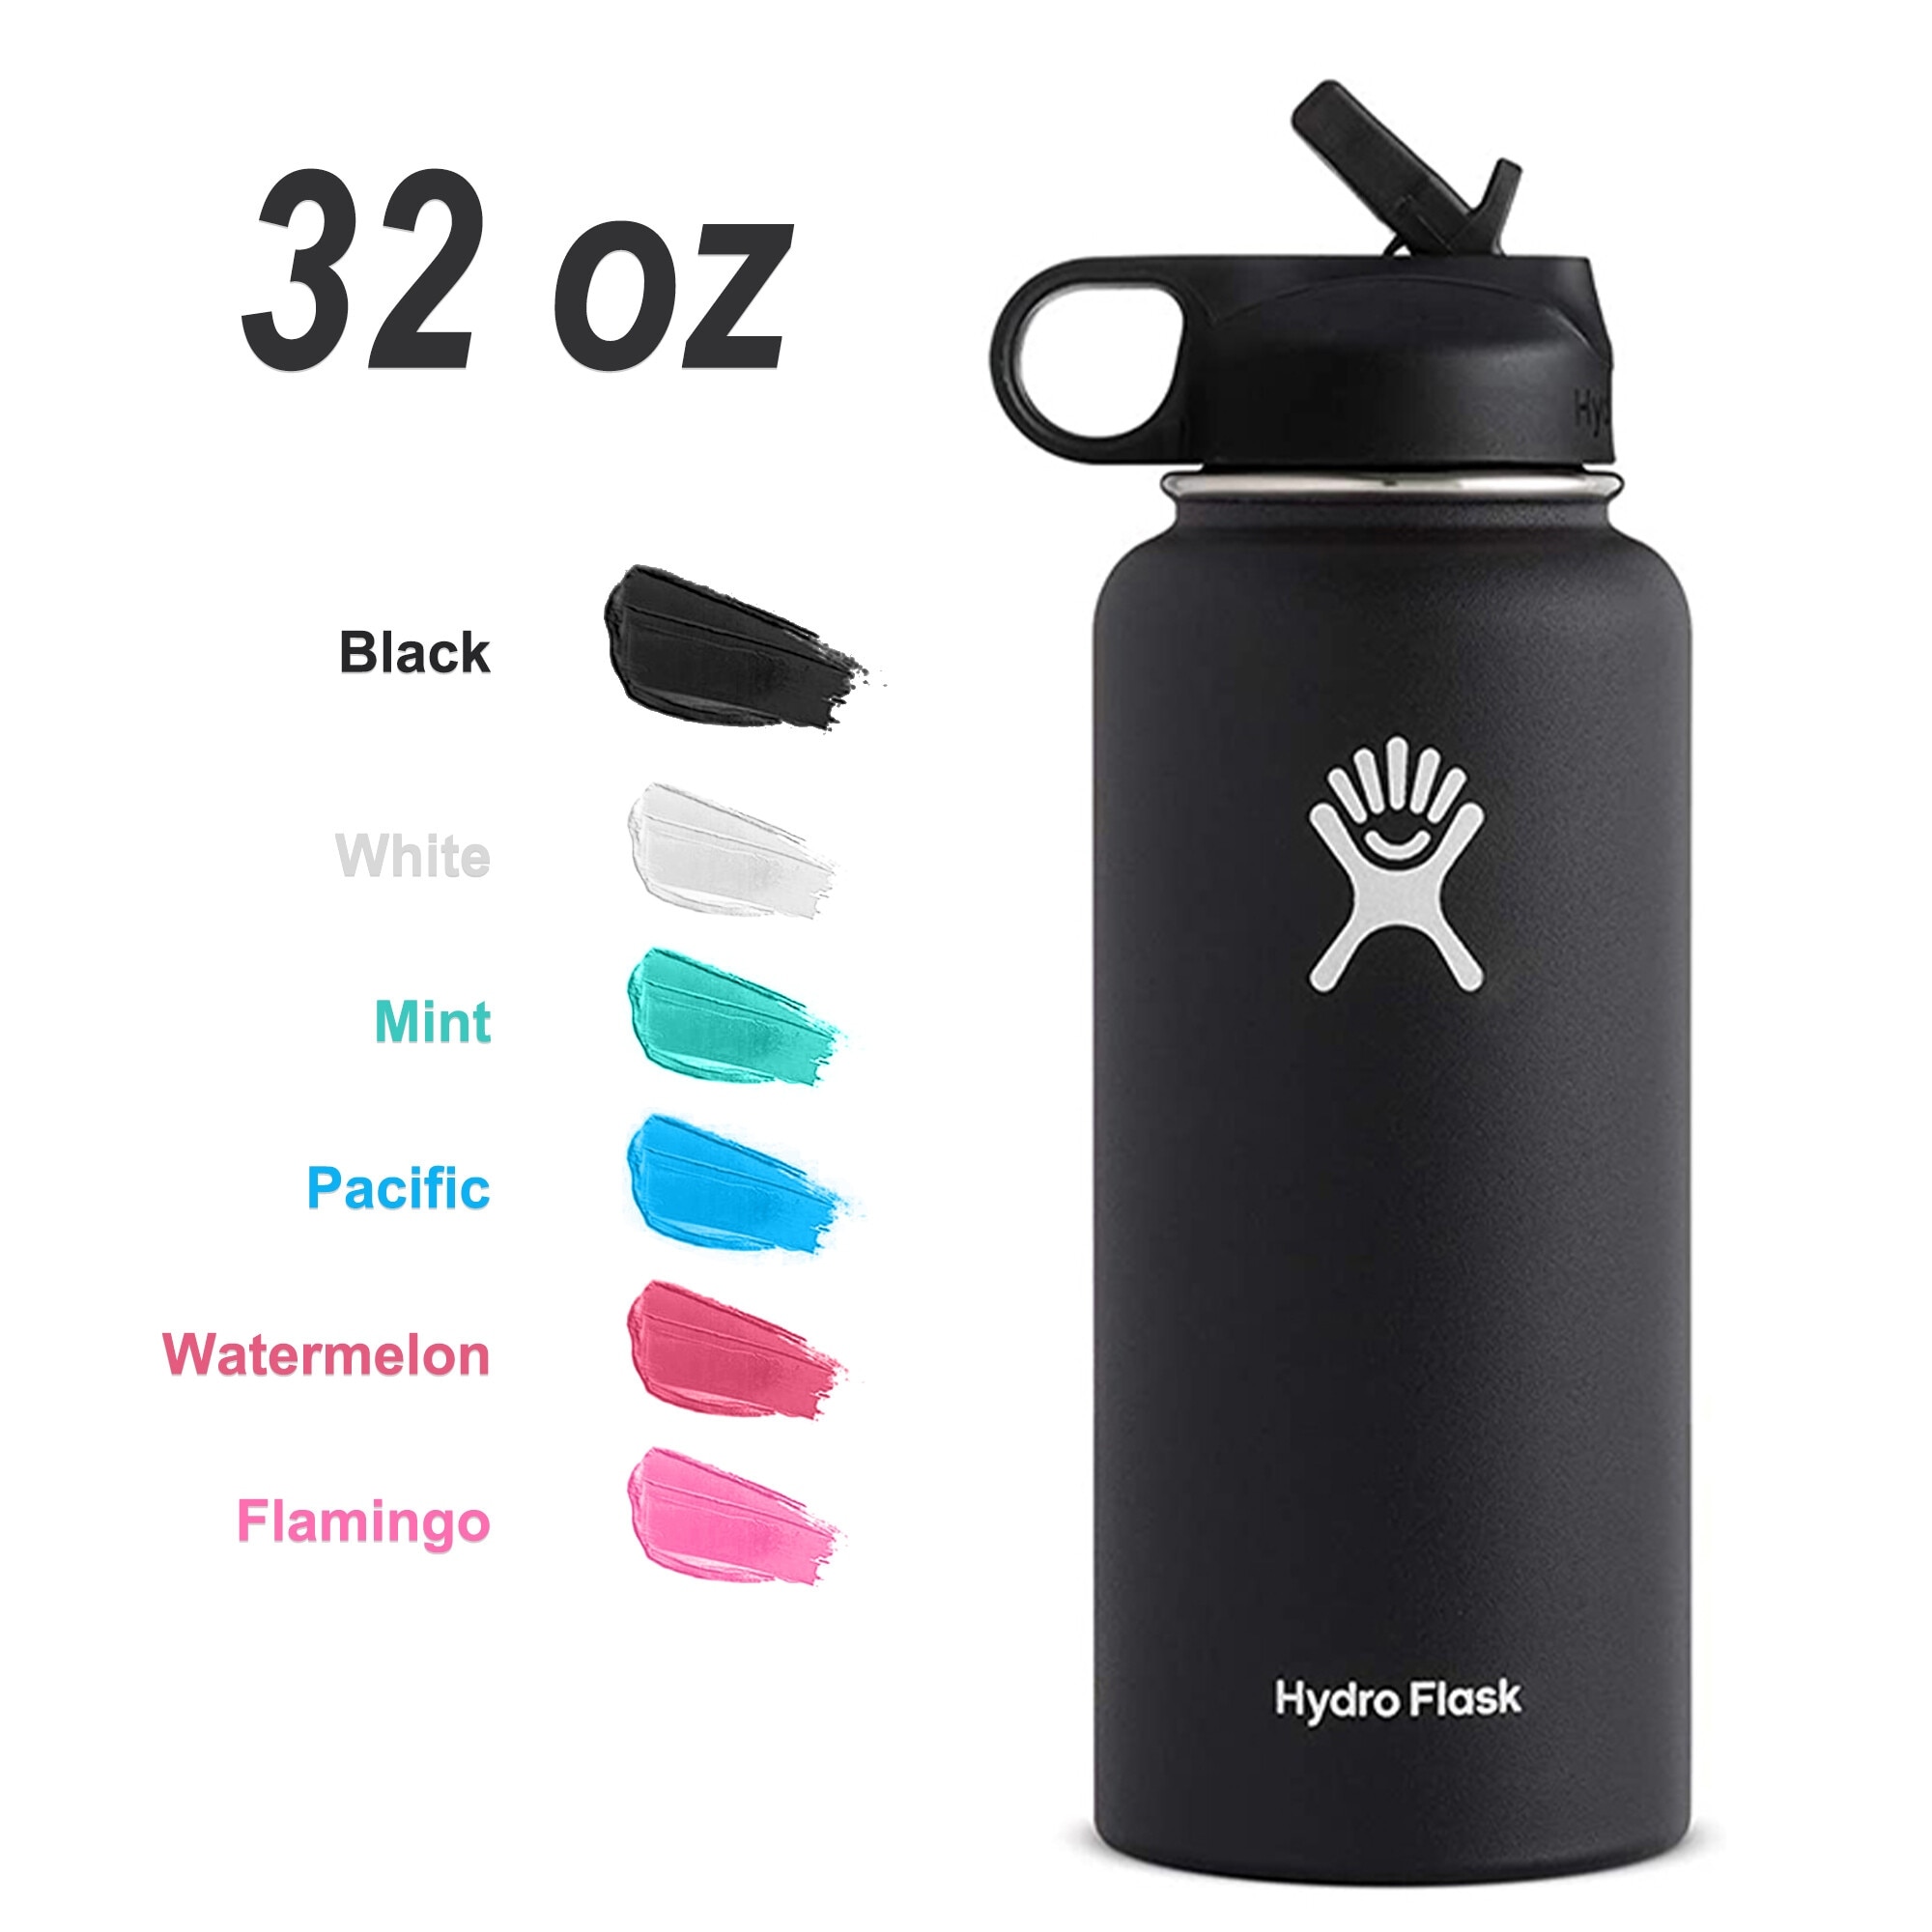 https://ak1.ostkcdn.com/images/products/is/images/direct/2088340243a98b5f20ce8a98bf4bd8d7d2797c6e/Hydro-Flask-32oz-Vacuum-Insulated-Stainless-Steel-Water-Bottle-Wide-Mouth-with-Straw-Lid.jpg